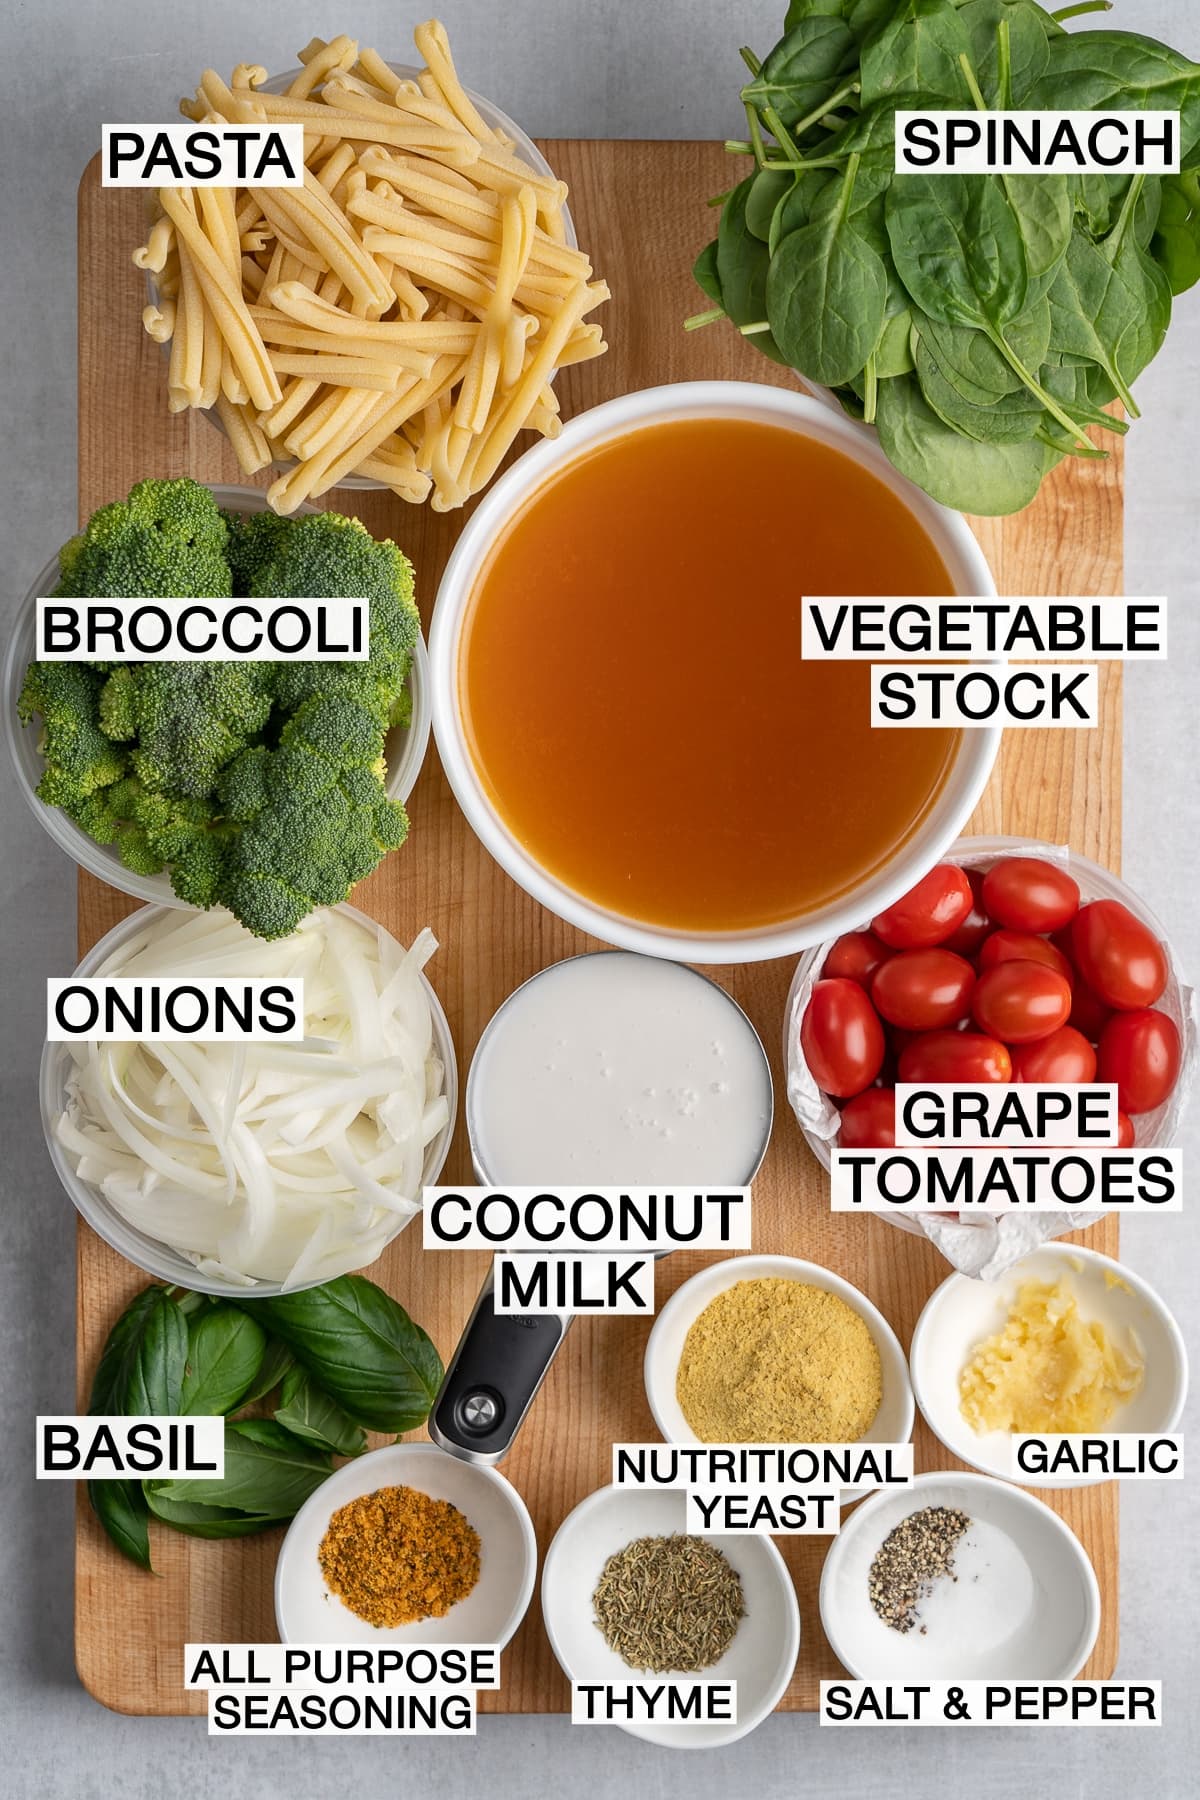 Ingredients for pasta on wooden cutting board